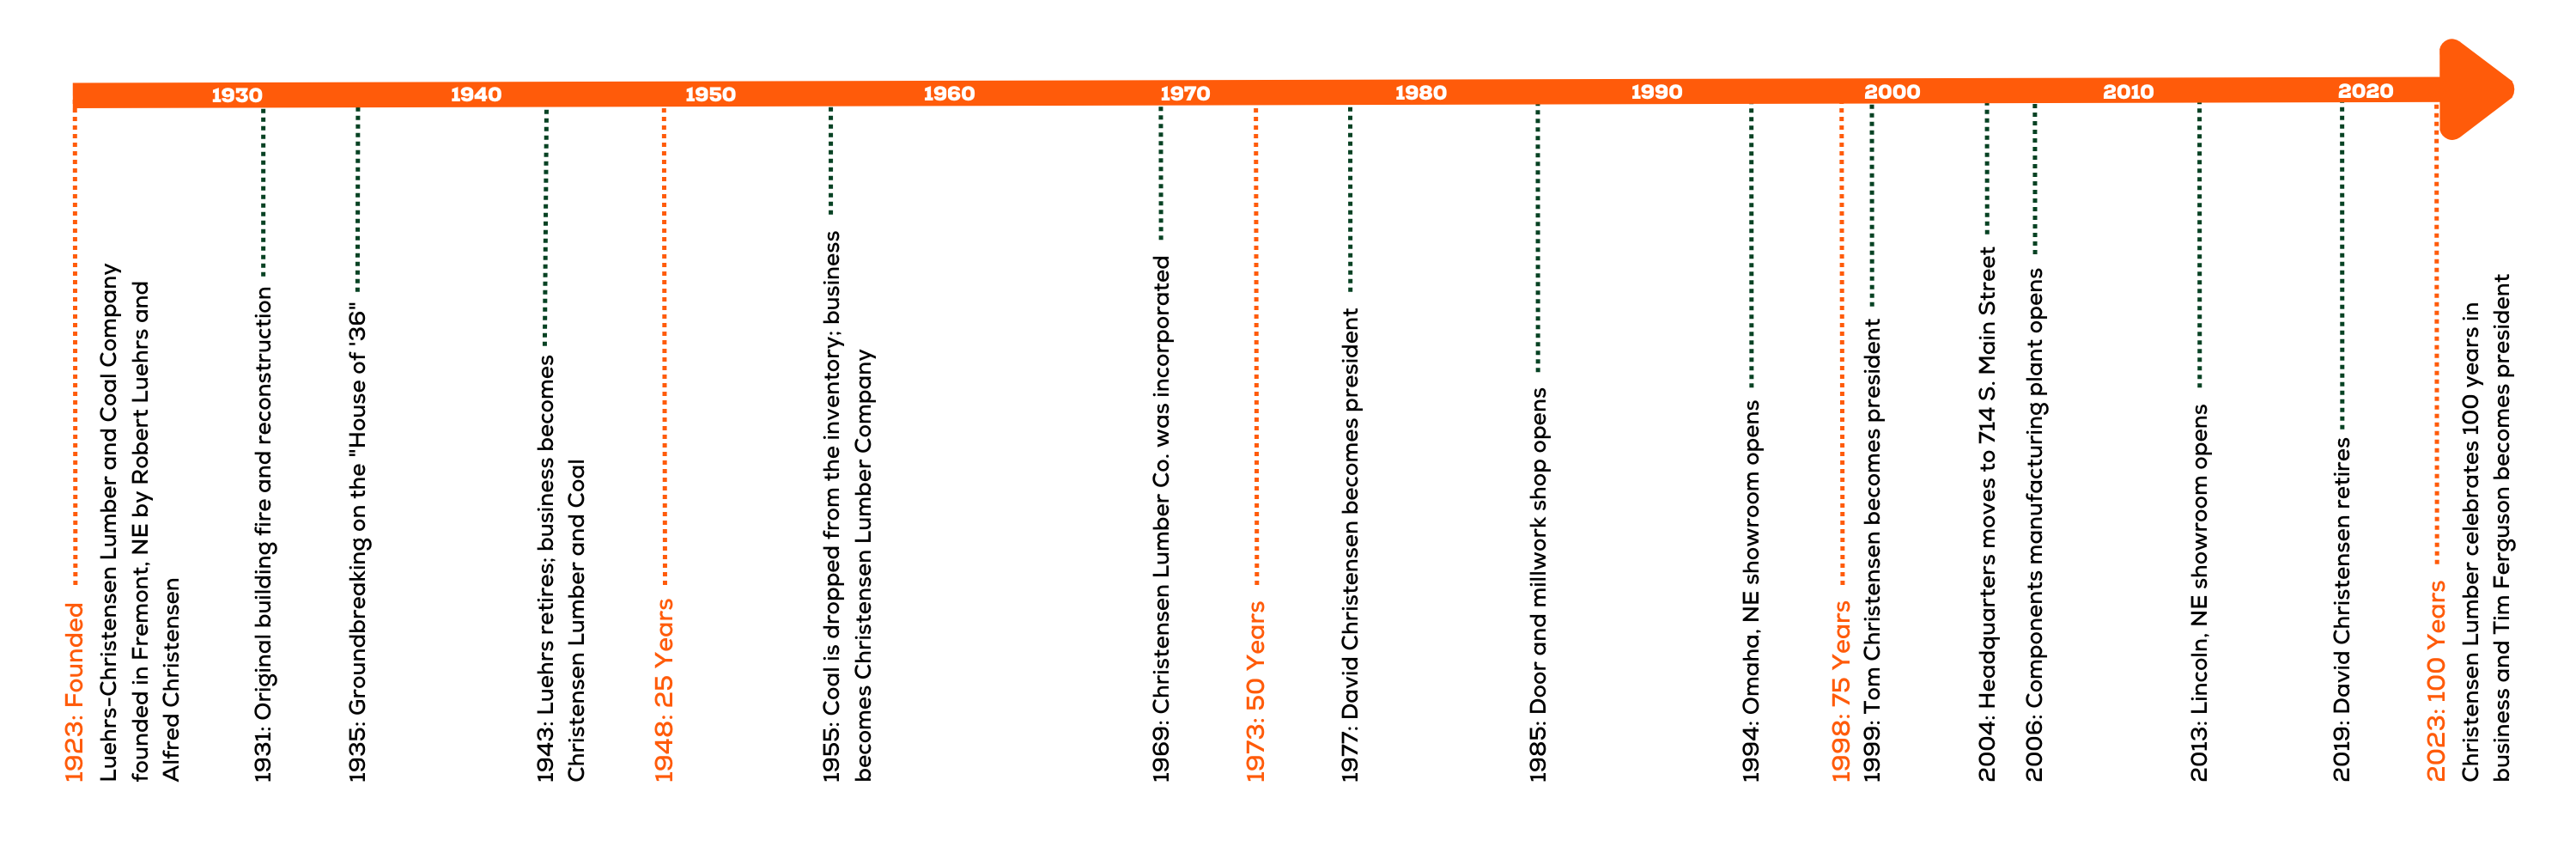 Timeline of events for Christensen Lumber Company from 1923 to 2023